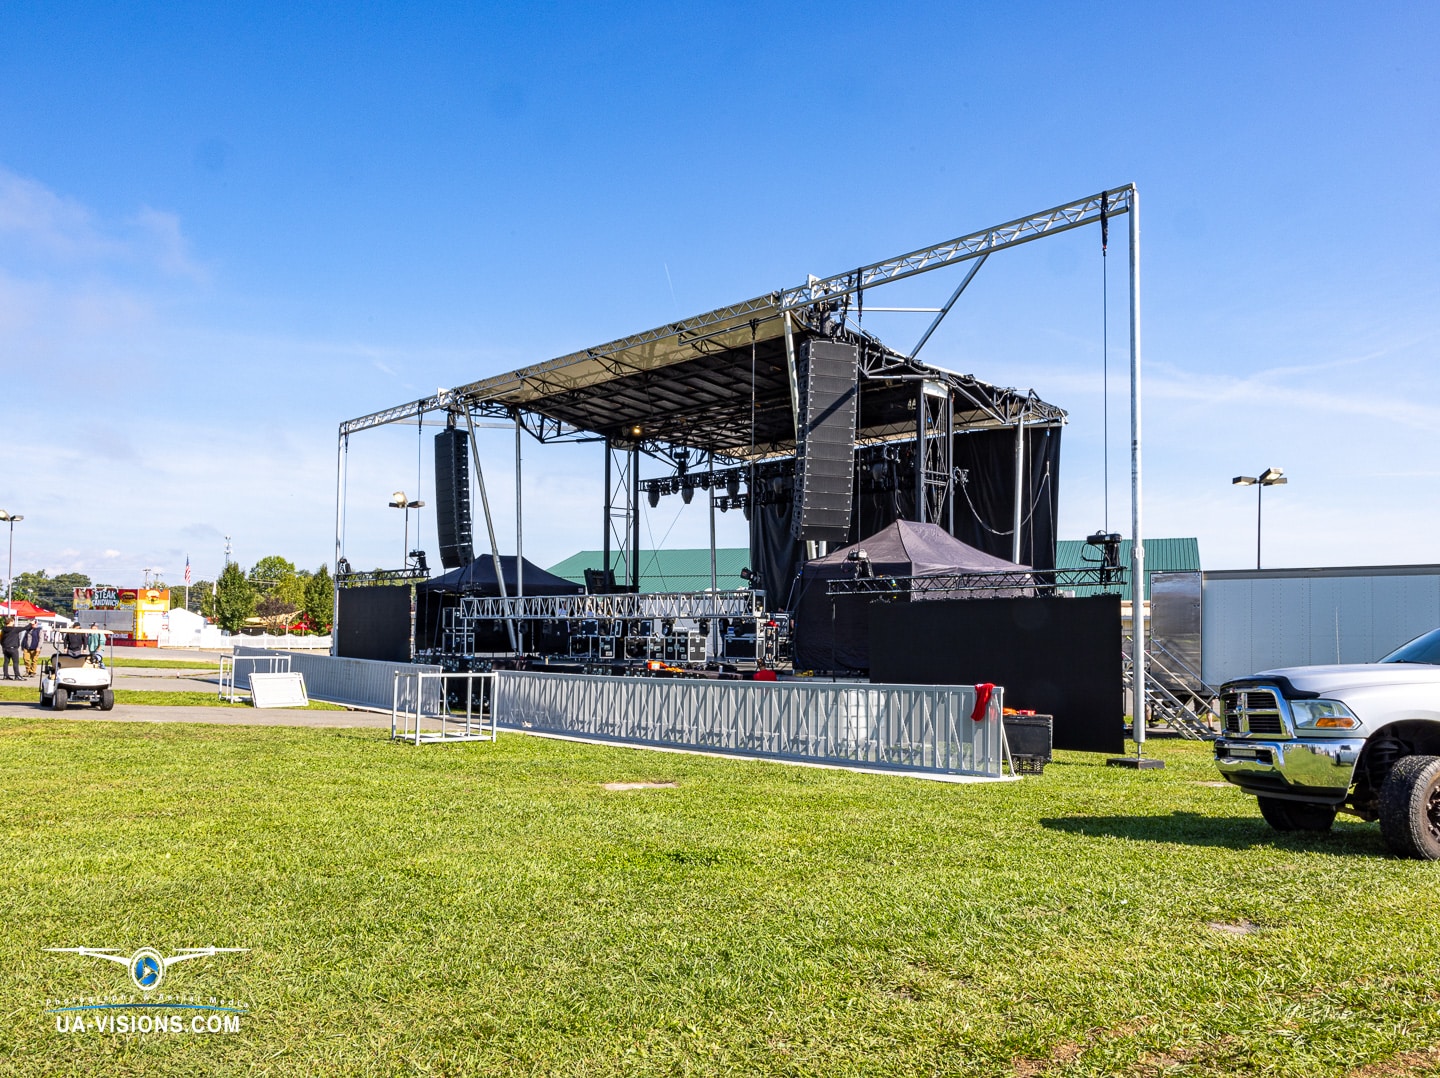 Open-air concert stage setup during daylight at the Healing Appalachia festival in Lewisburg, WV.